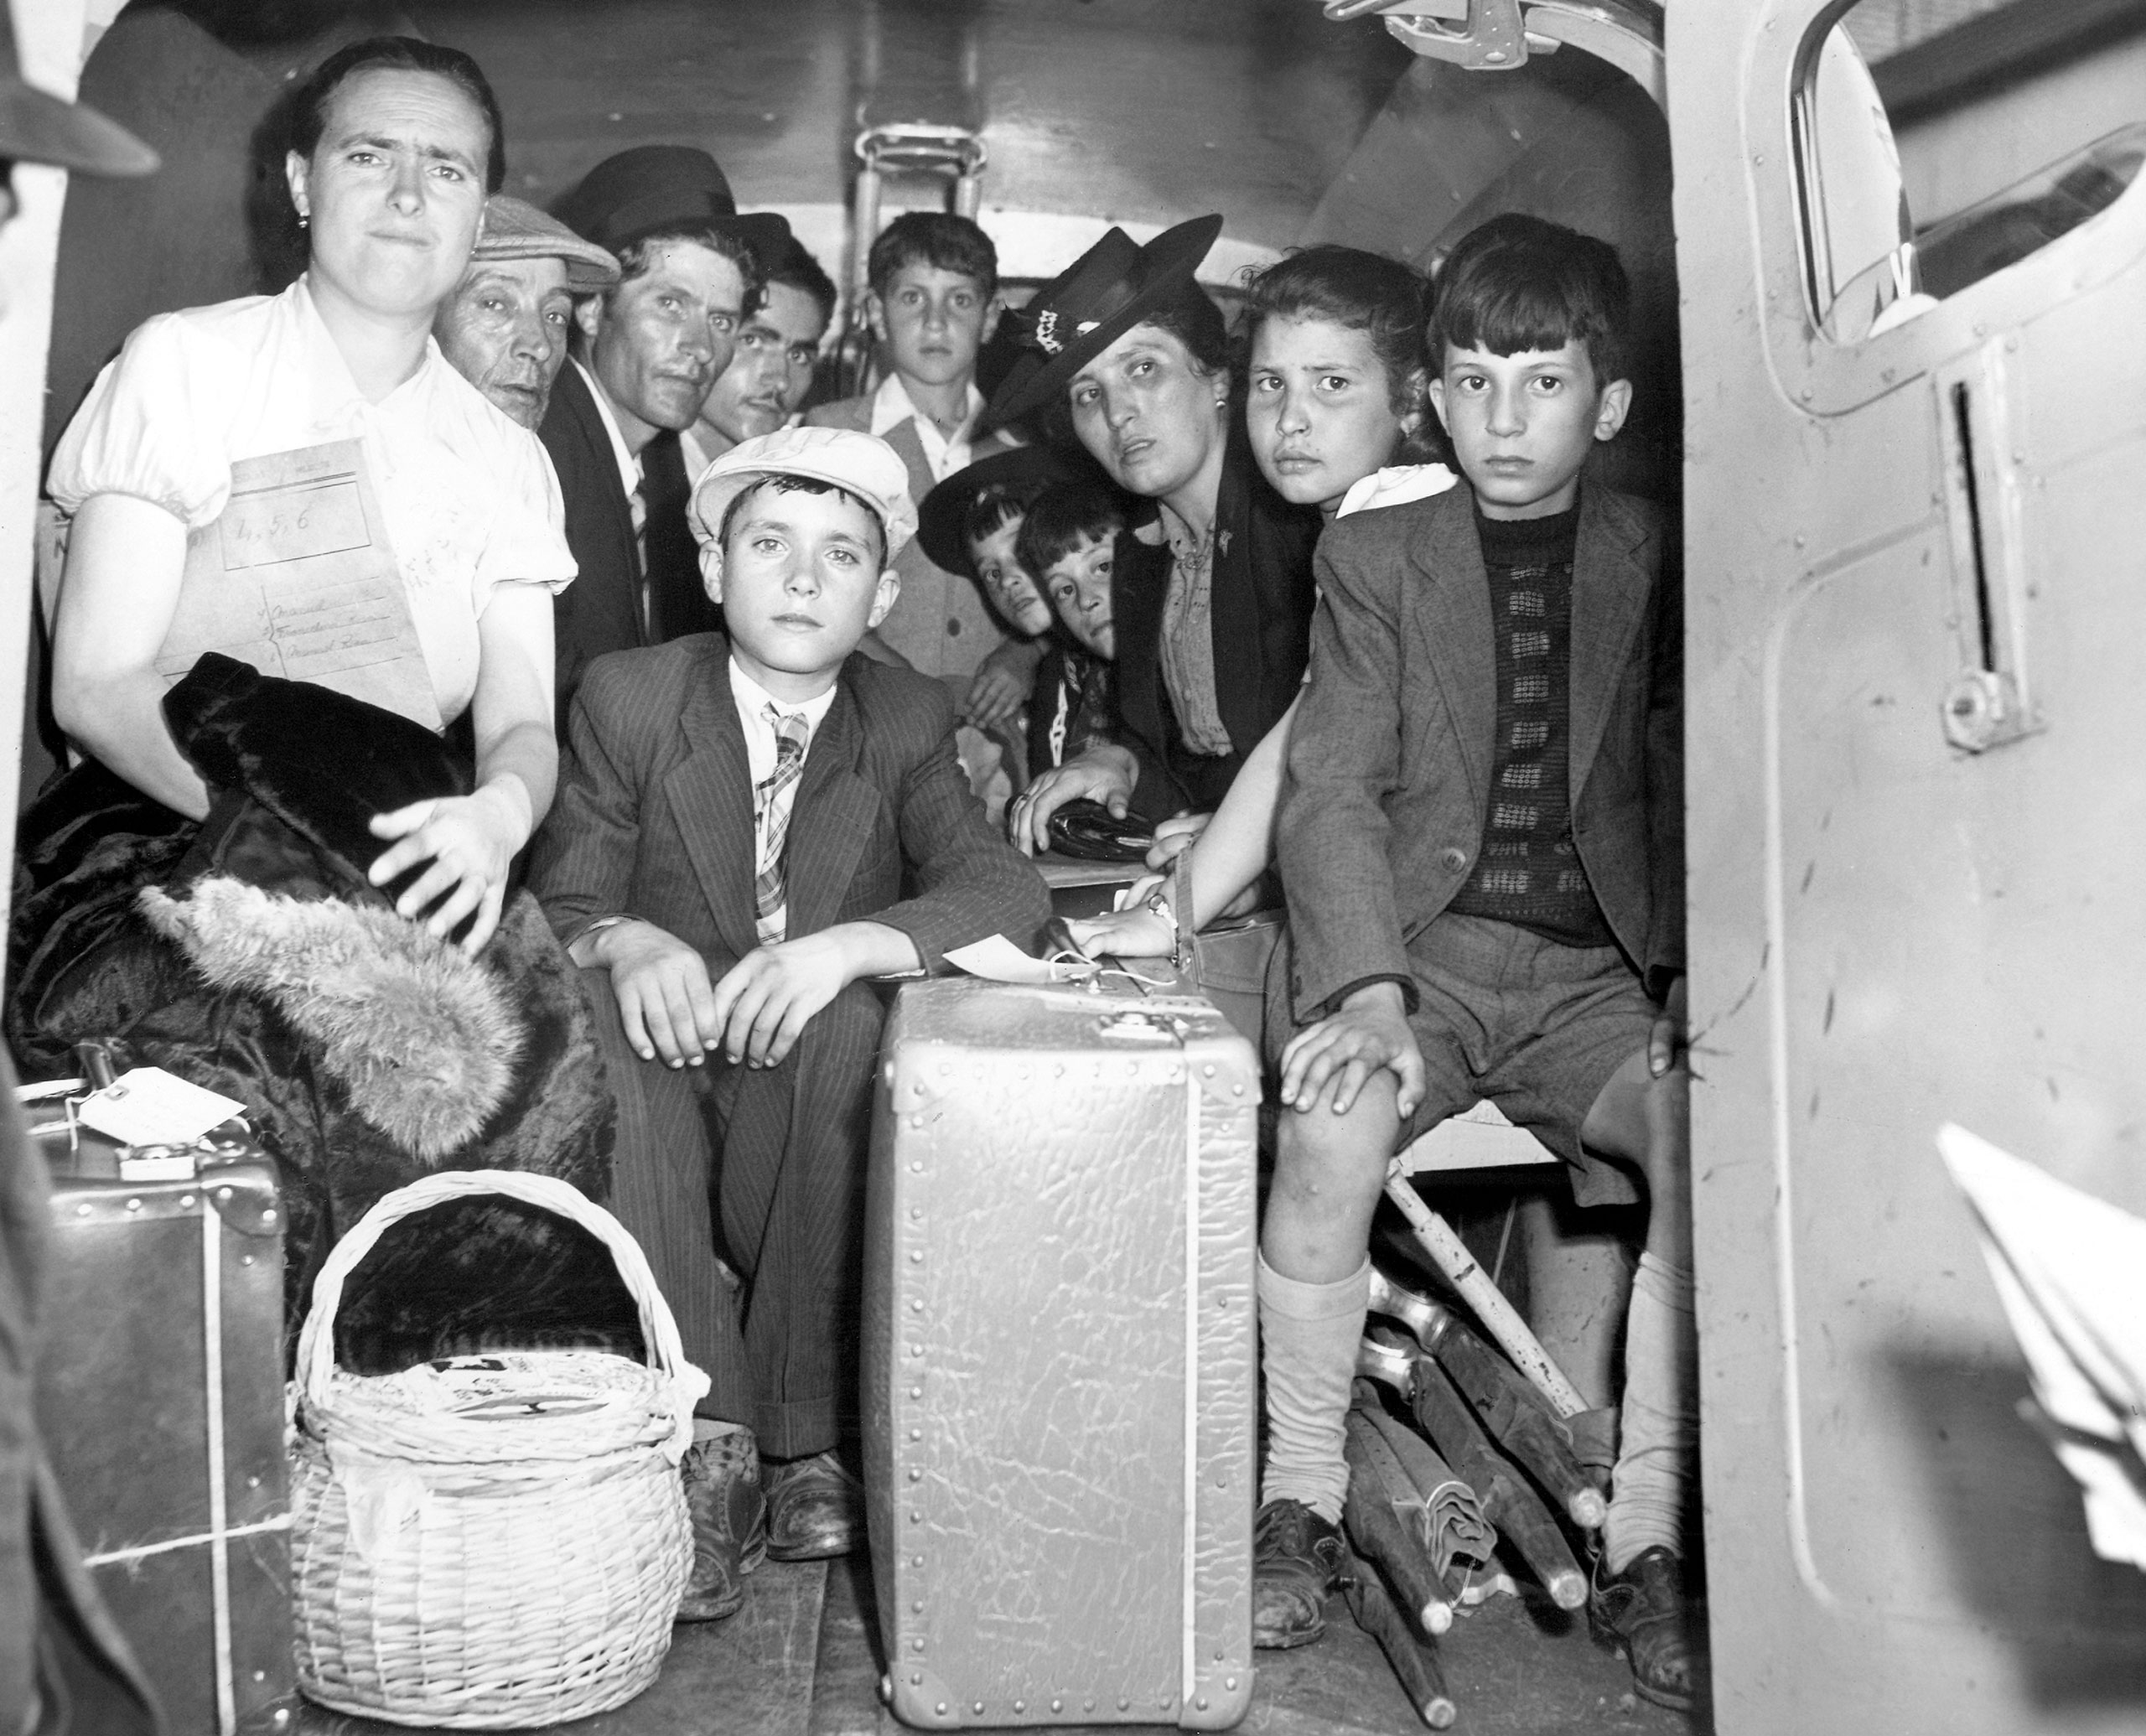 Group of passengers from the Portuguese ship Serpa Pinto, which was stopped by a German submarine and ordered abandoned off Bermuda, are shown after their arrival in Philadelphia, May 31, 1944. The U-boat officers abandoned plans to sink the vessel and permitted the passengers to re-board her after receiving wireless orders from Berlin.